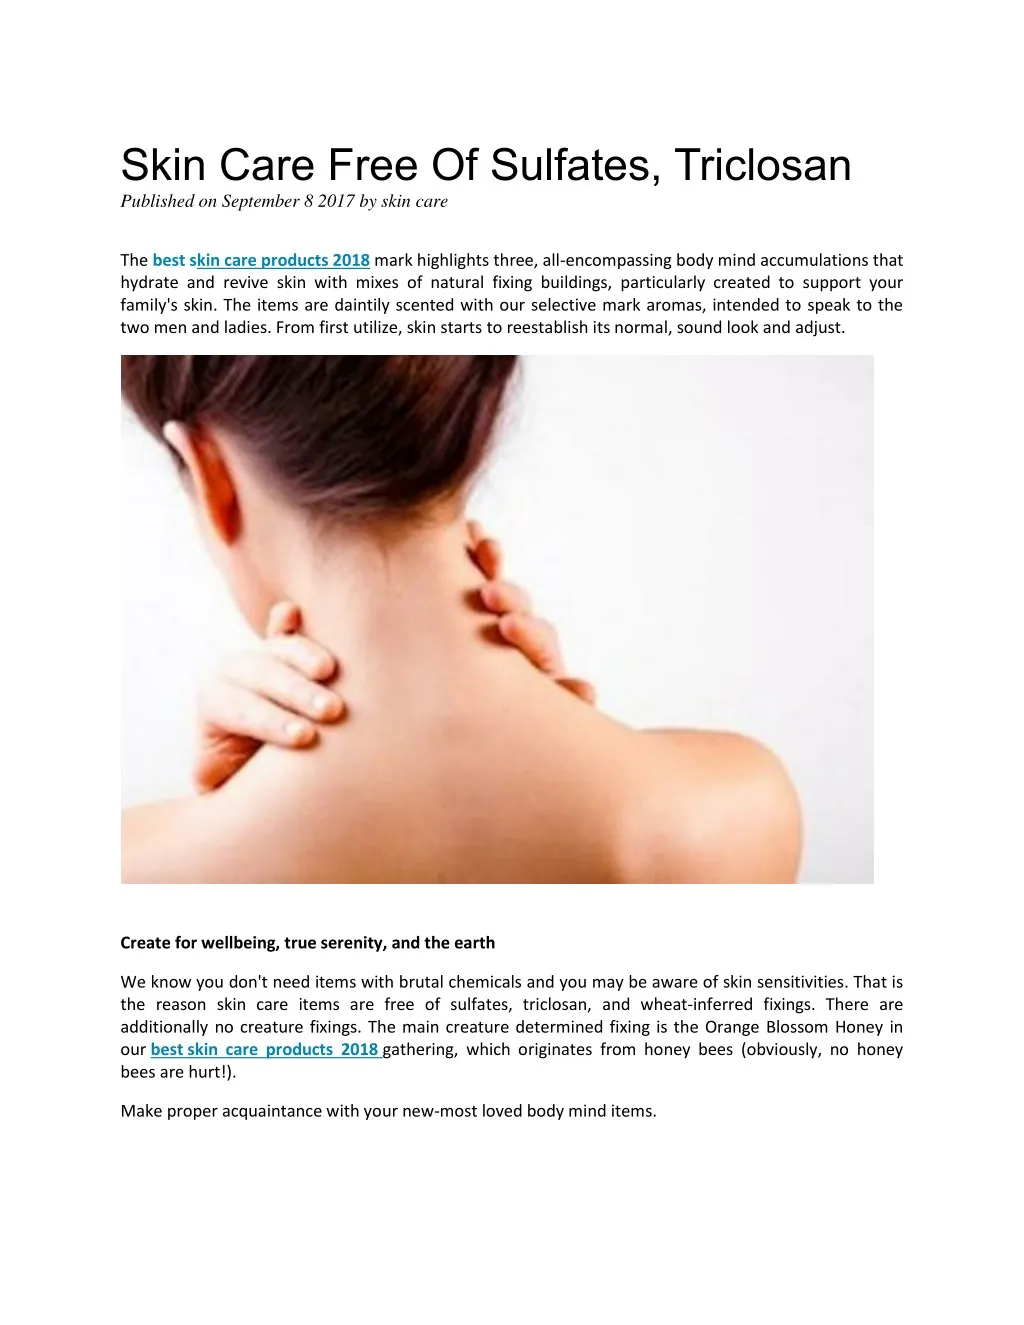 skin care free of sulfates triclosan published